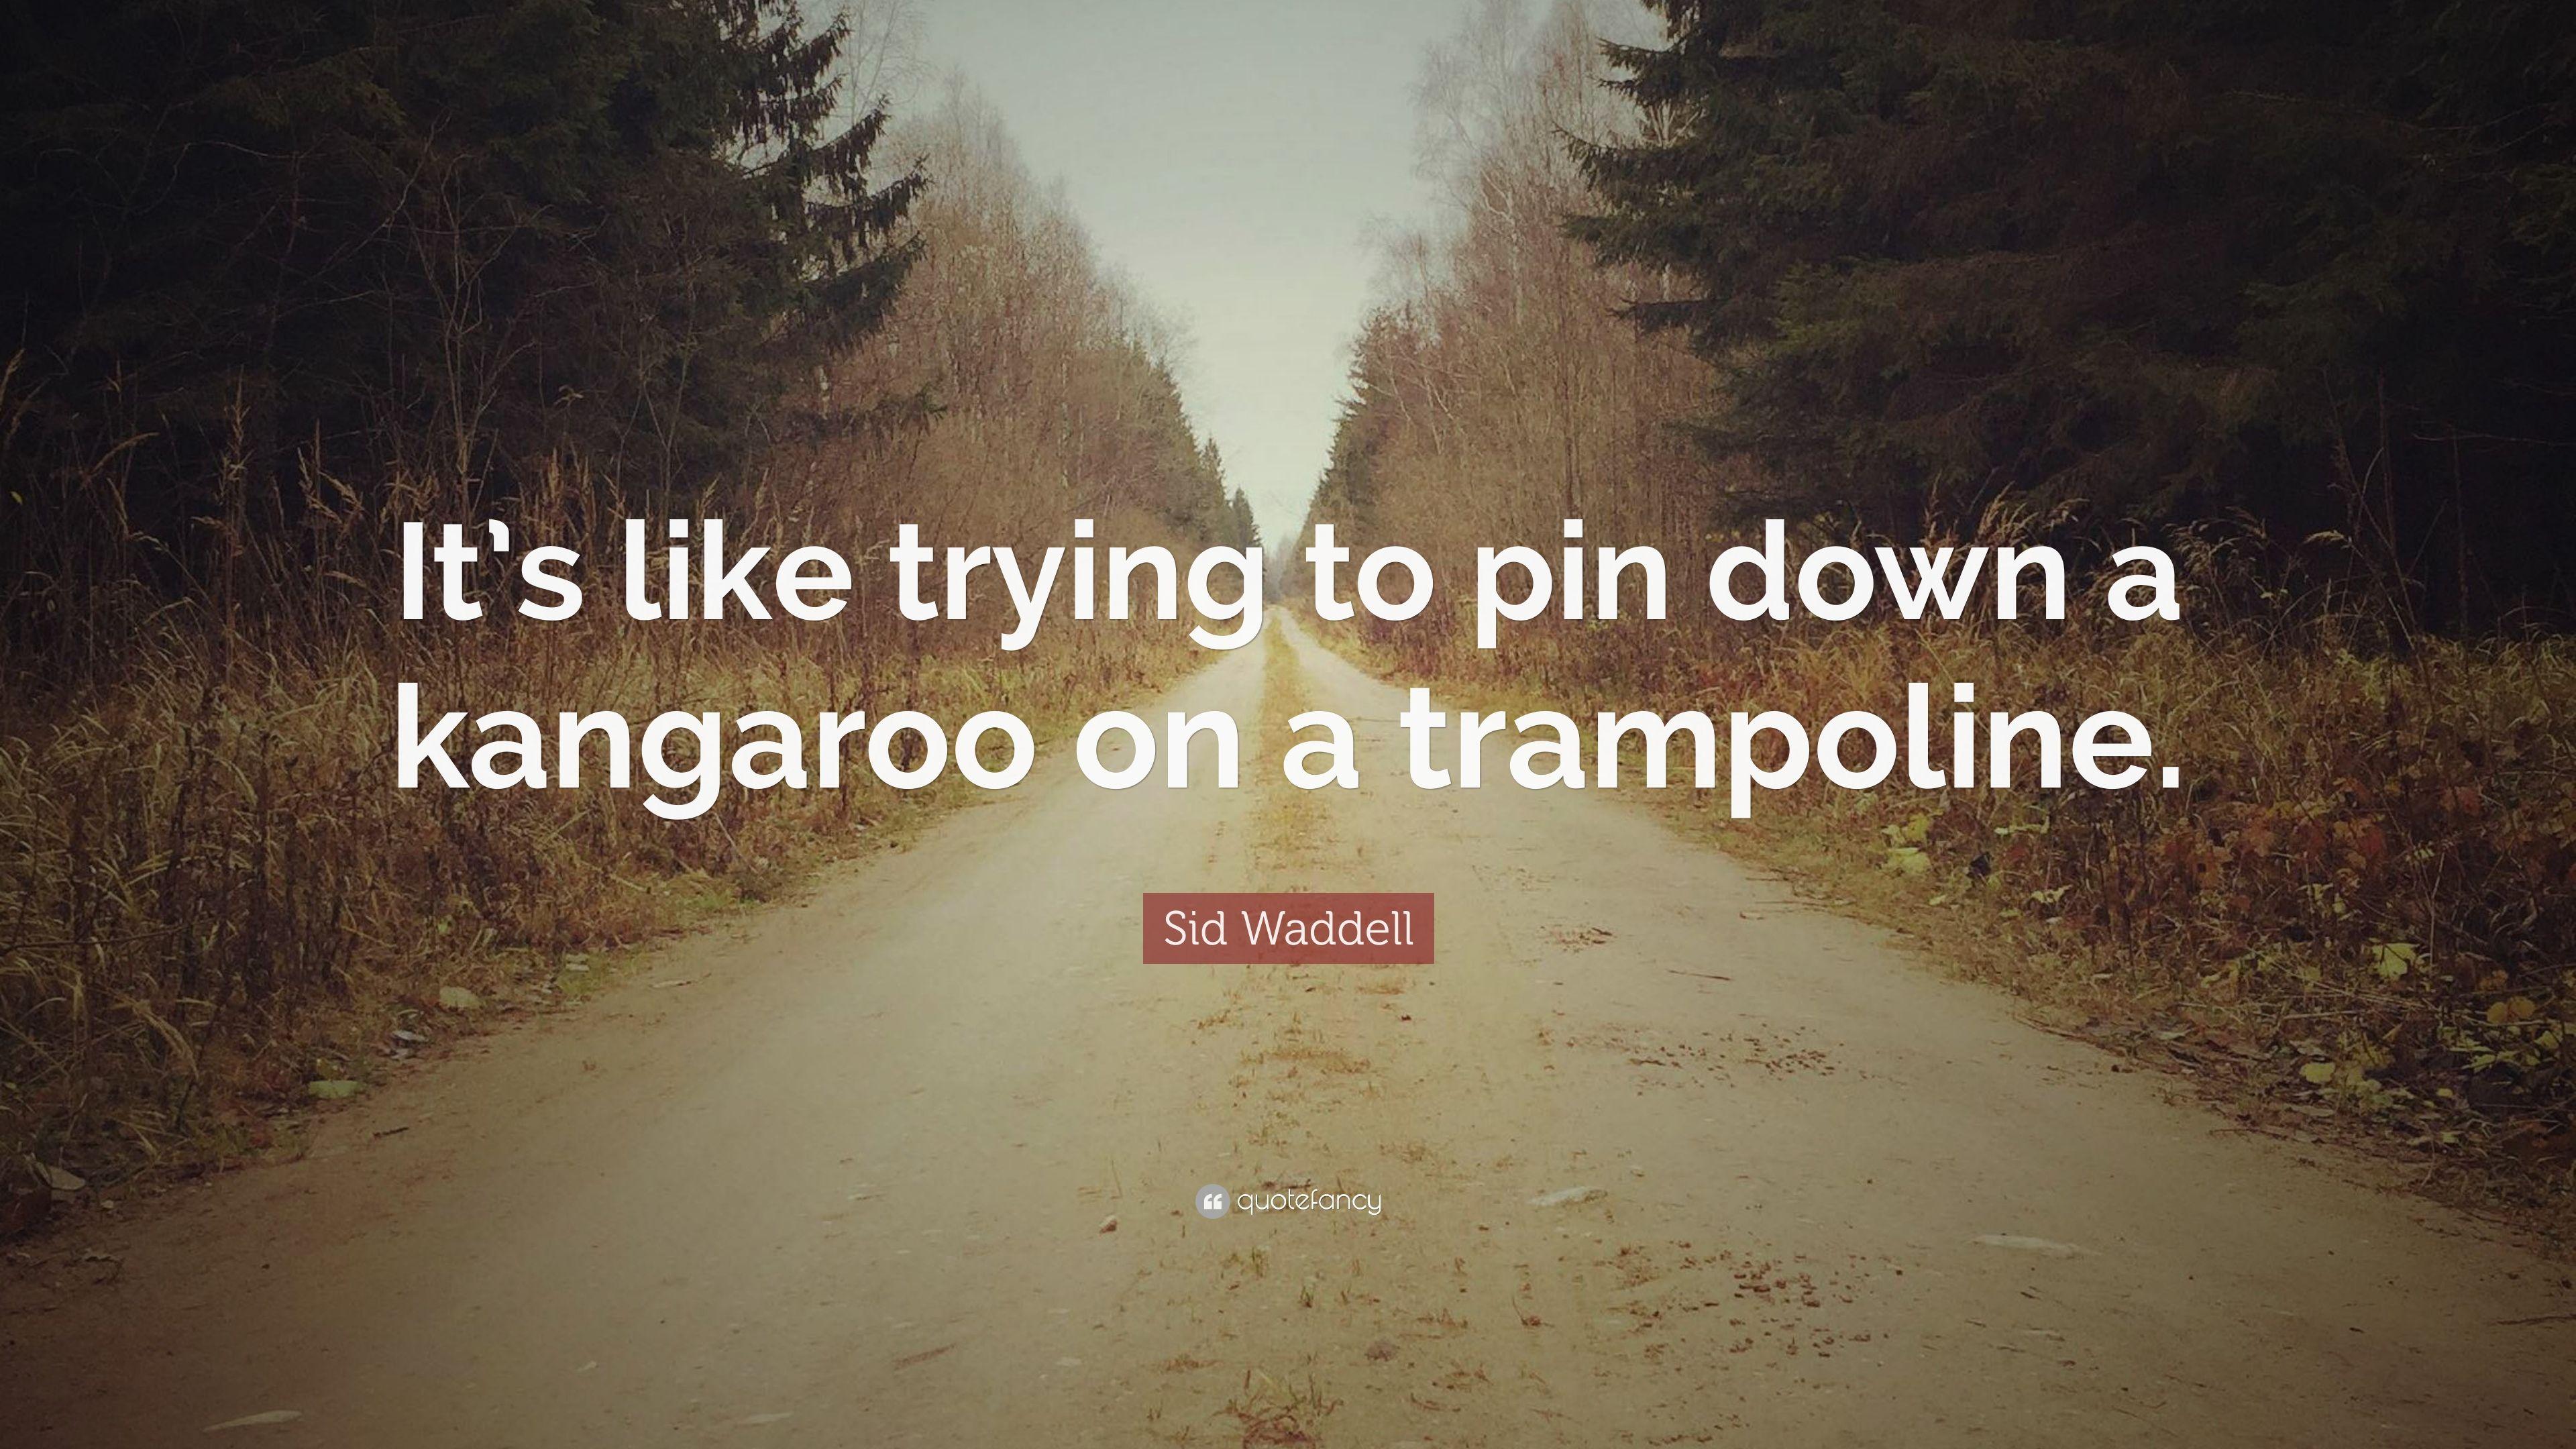 Sid Waddell Quote: “It's like trying to pin down a kangaroo on a